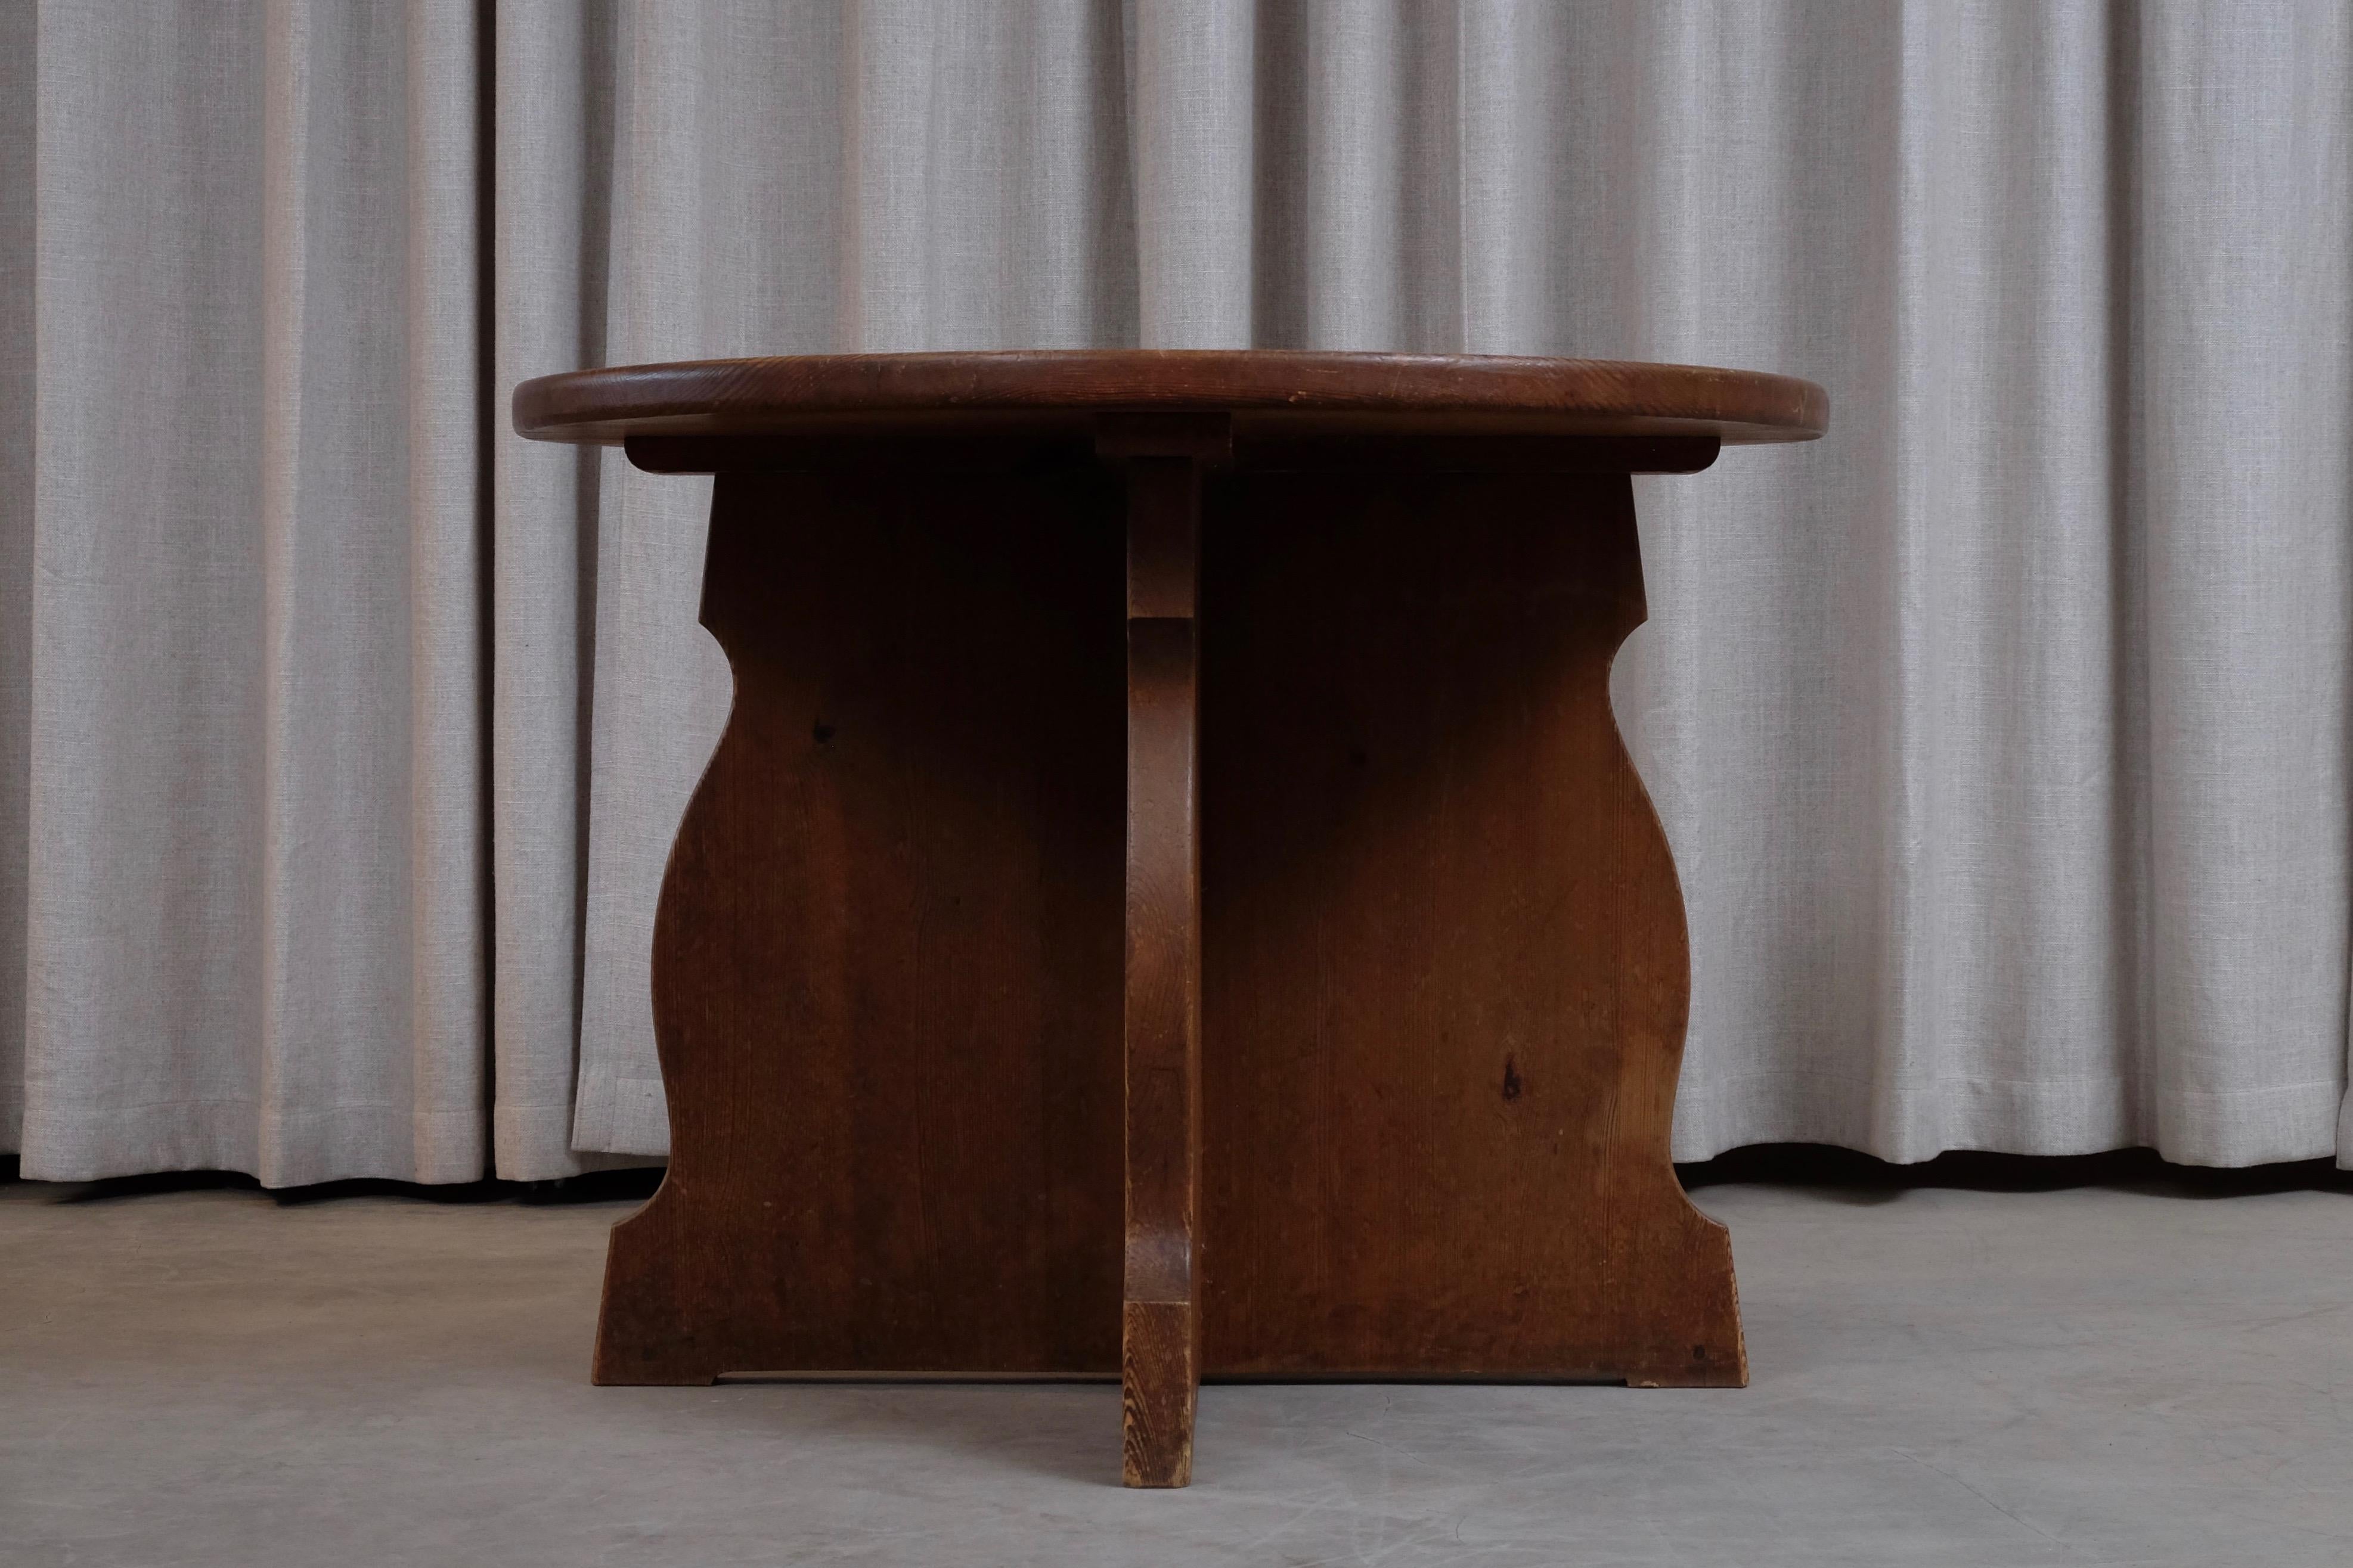 Lovely side table or coffee table in dark stained pine. Produced in Sweden, early 1940s.
Please note: set of 6 chairs, cabinet and dining table available from the same series.